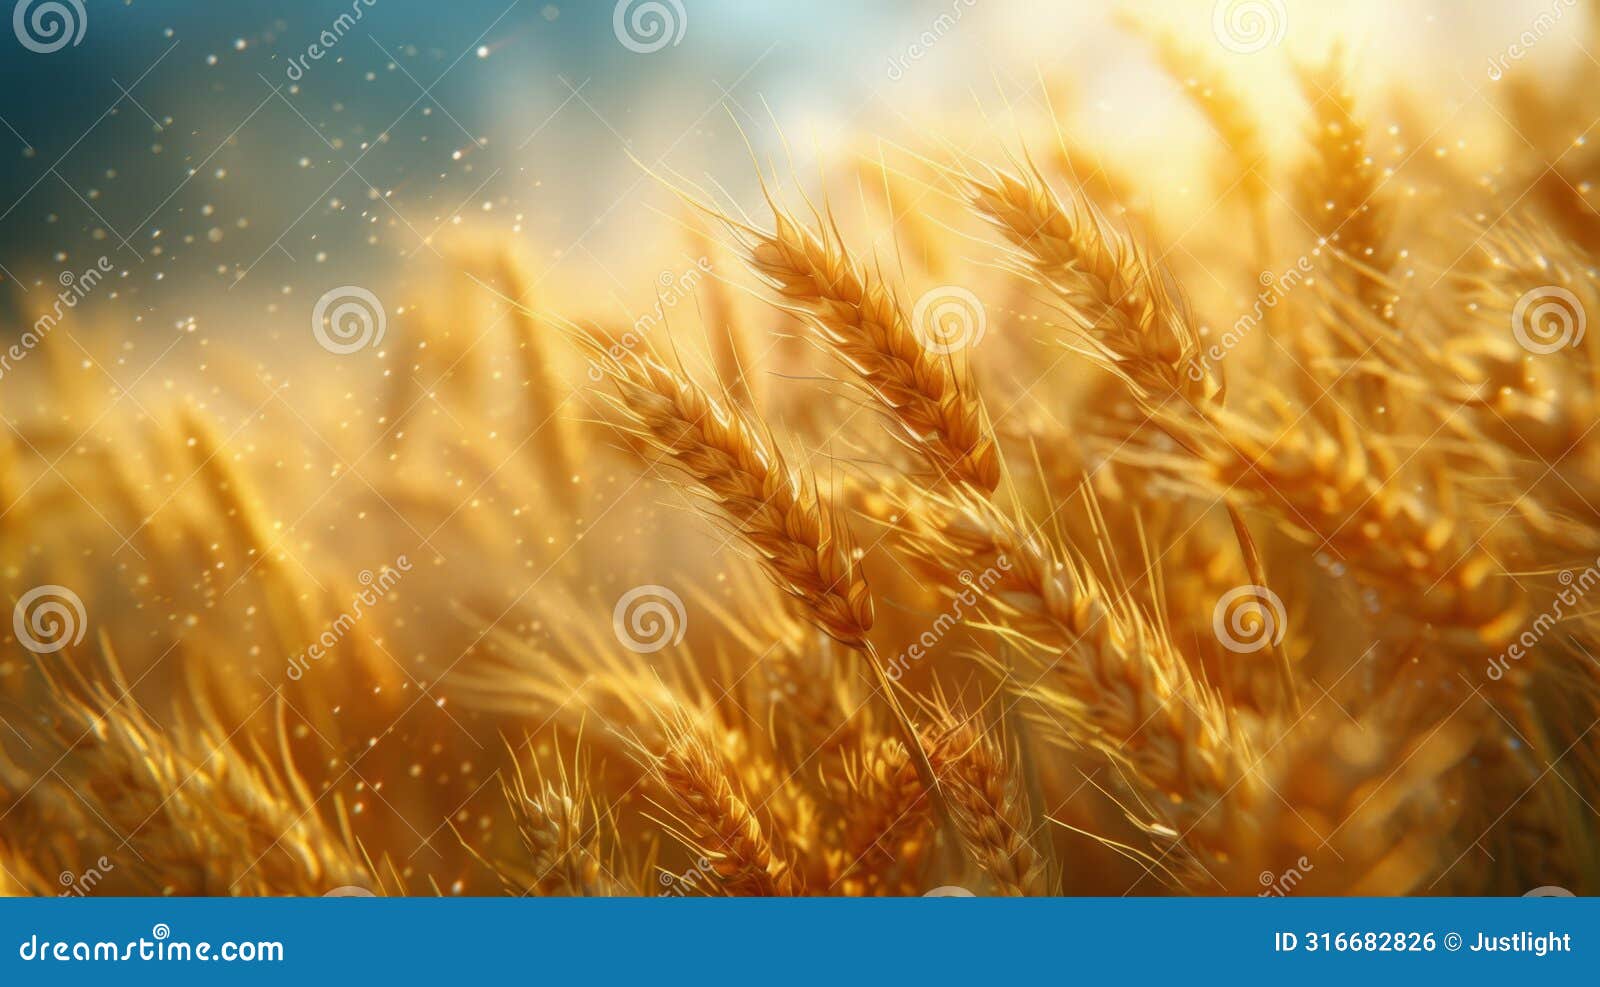 closeup of a lone wheat head its feathery texture rippling in the wind like a symphony conductors baton